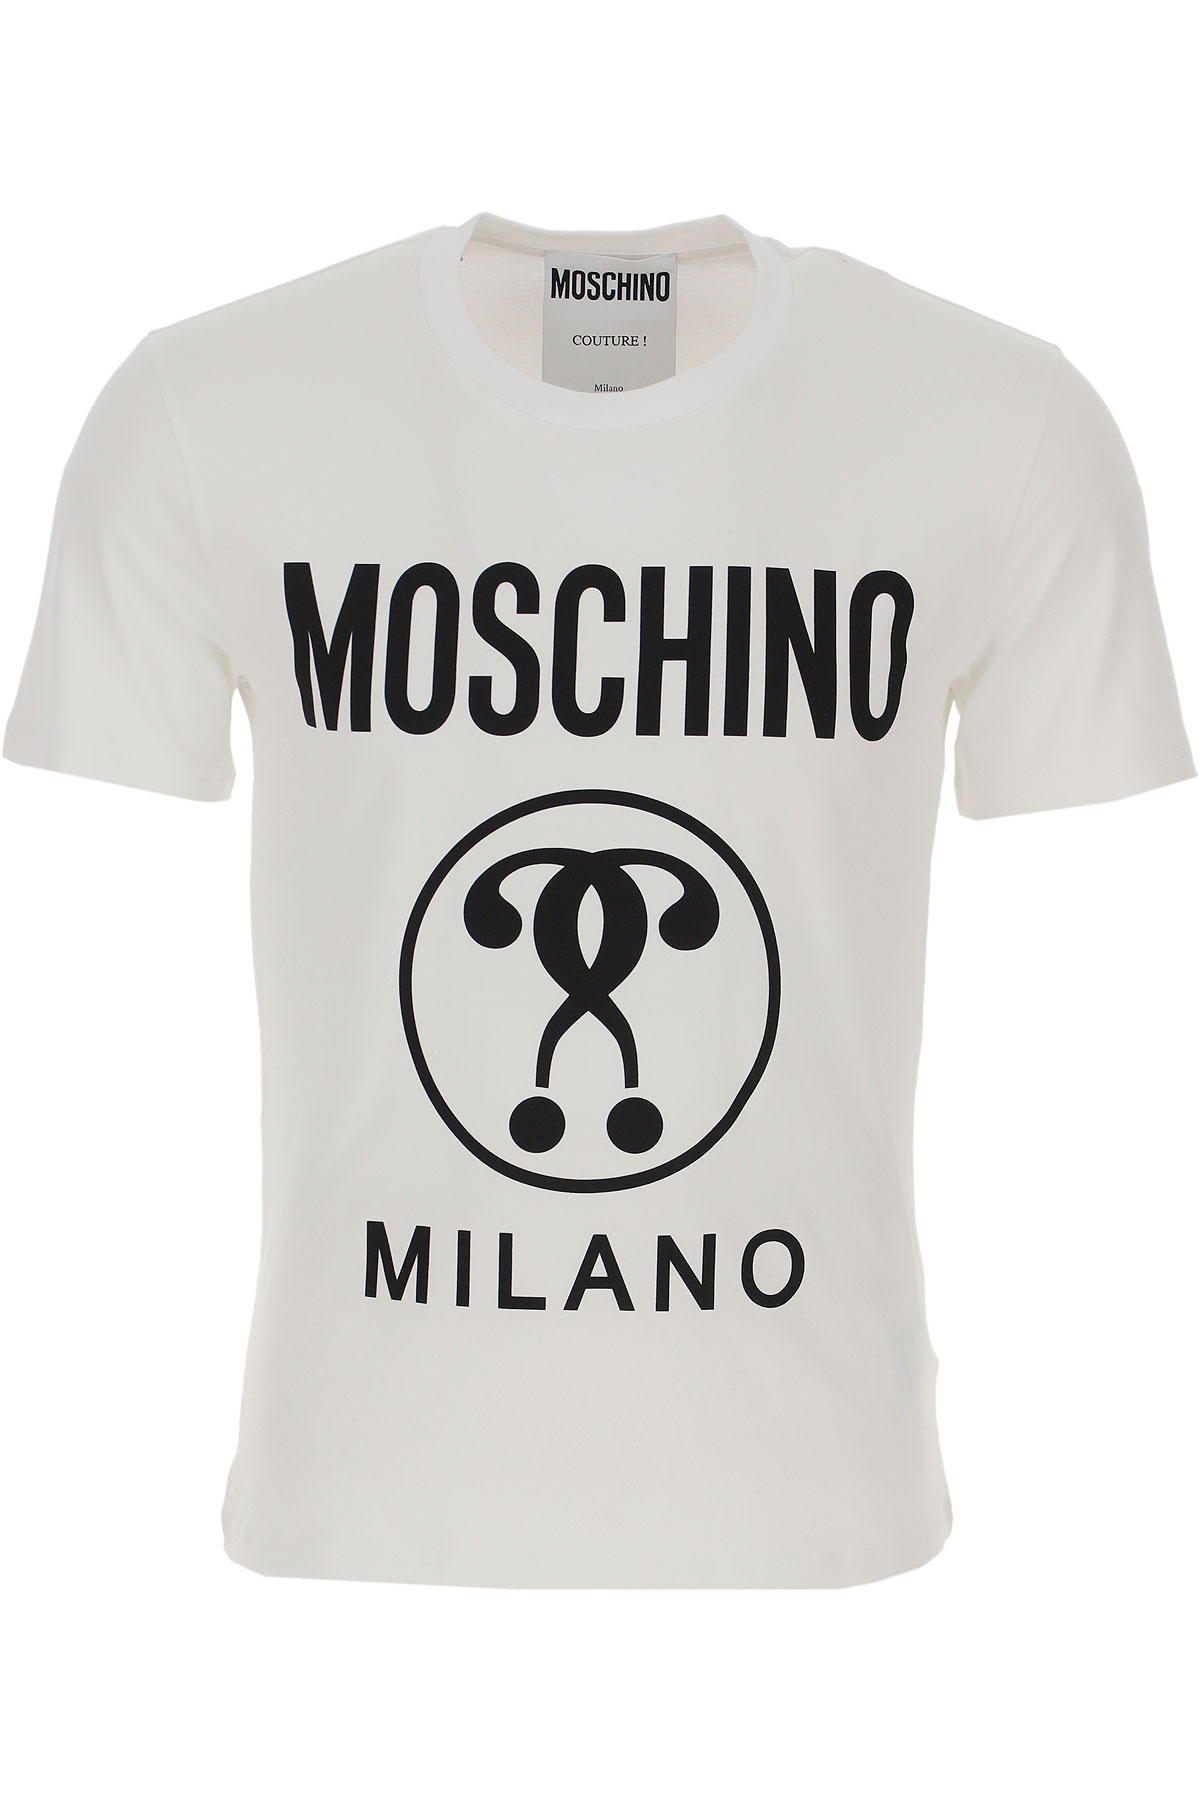 Mens Clothing Moschino, Style code: zpa0712-7039-a1001